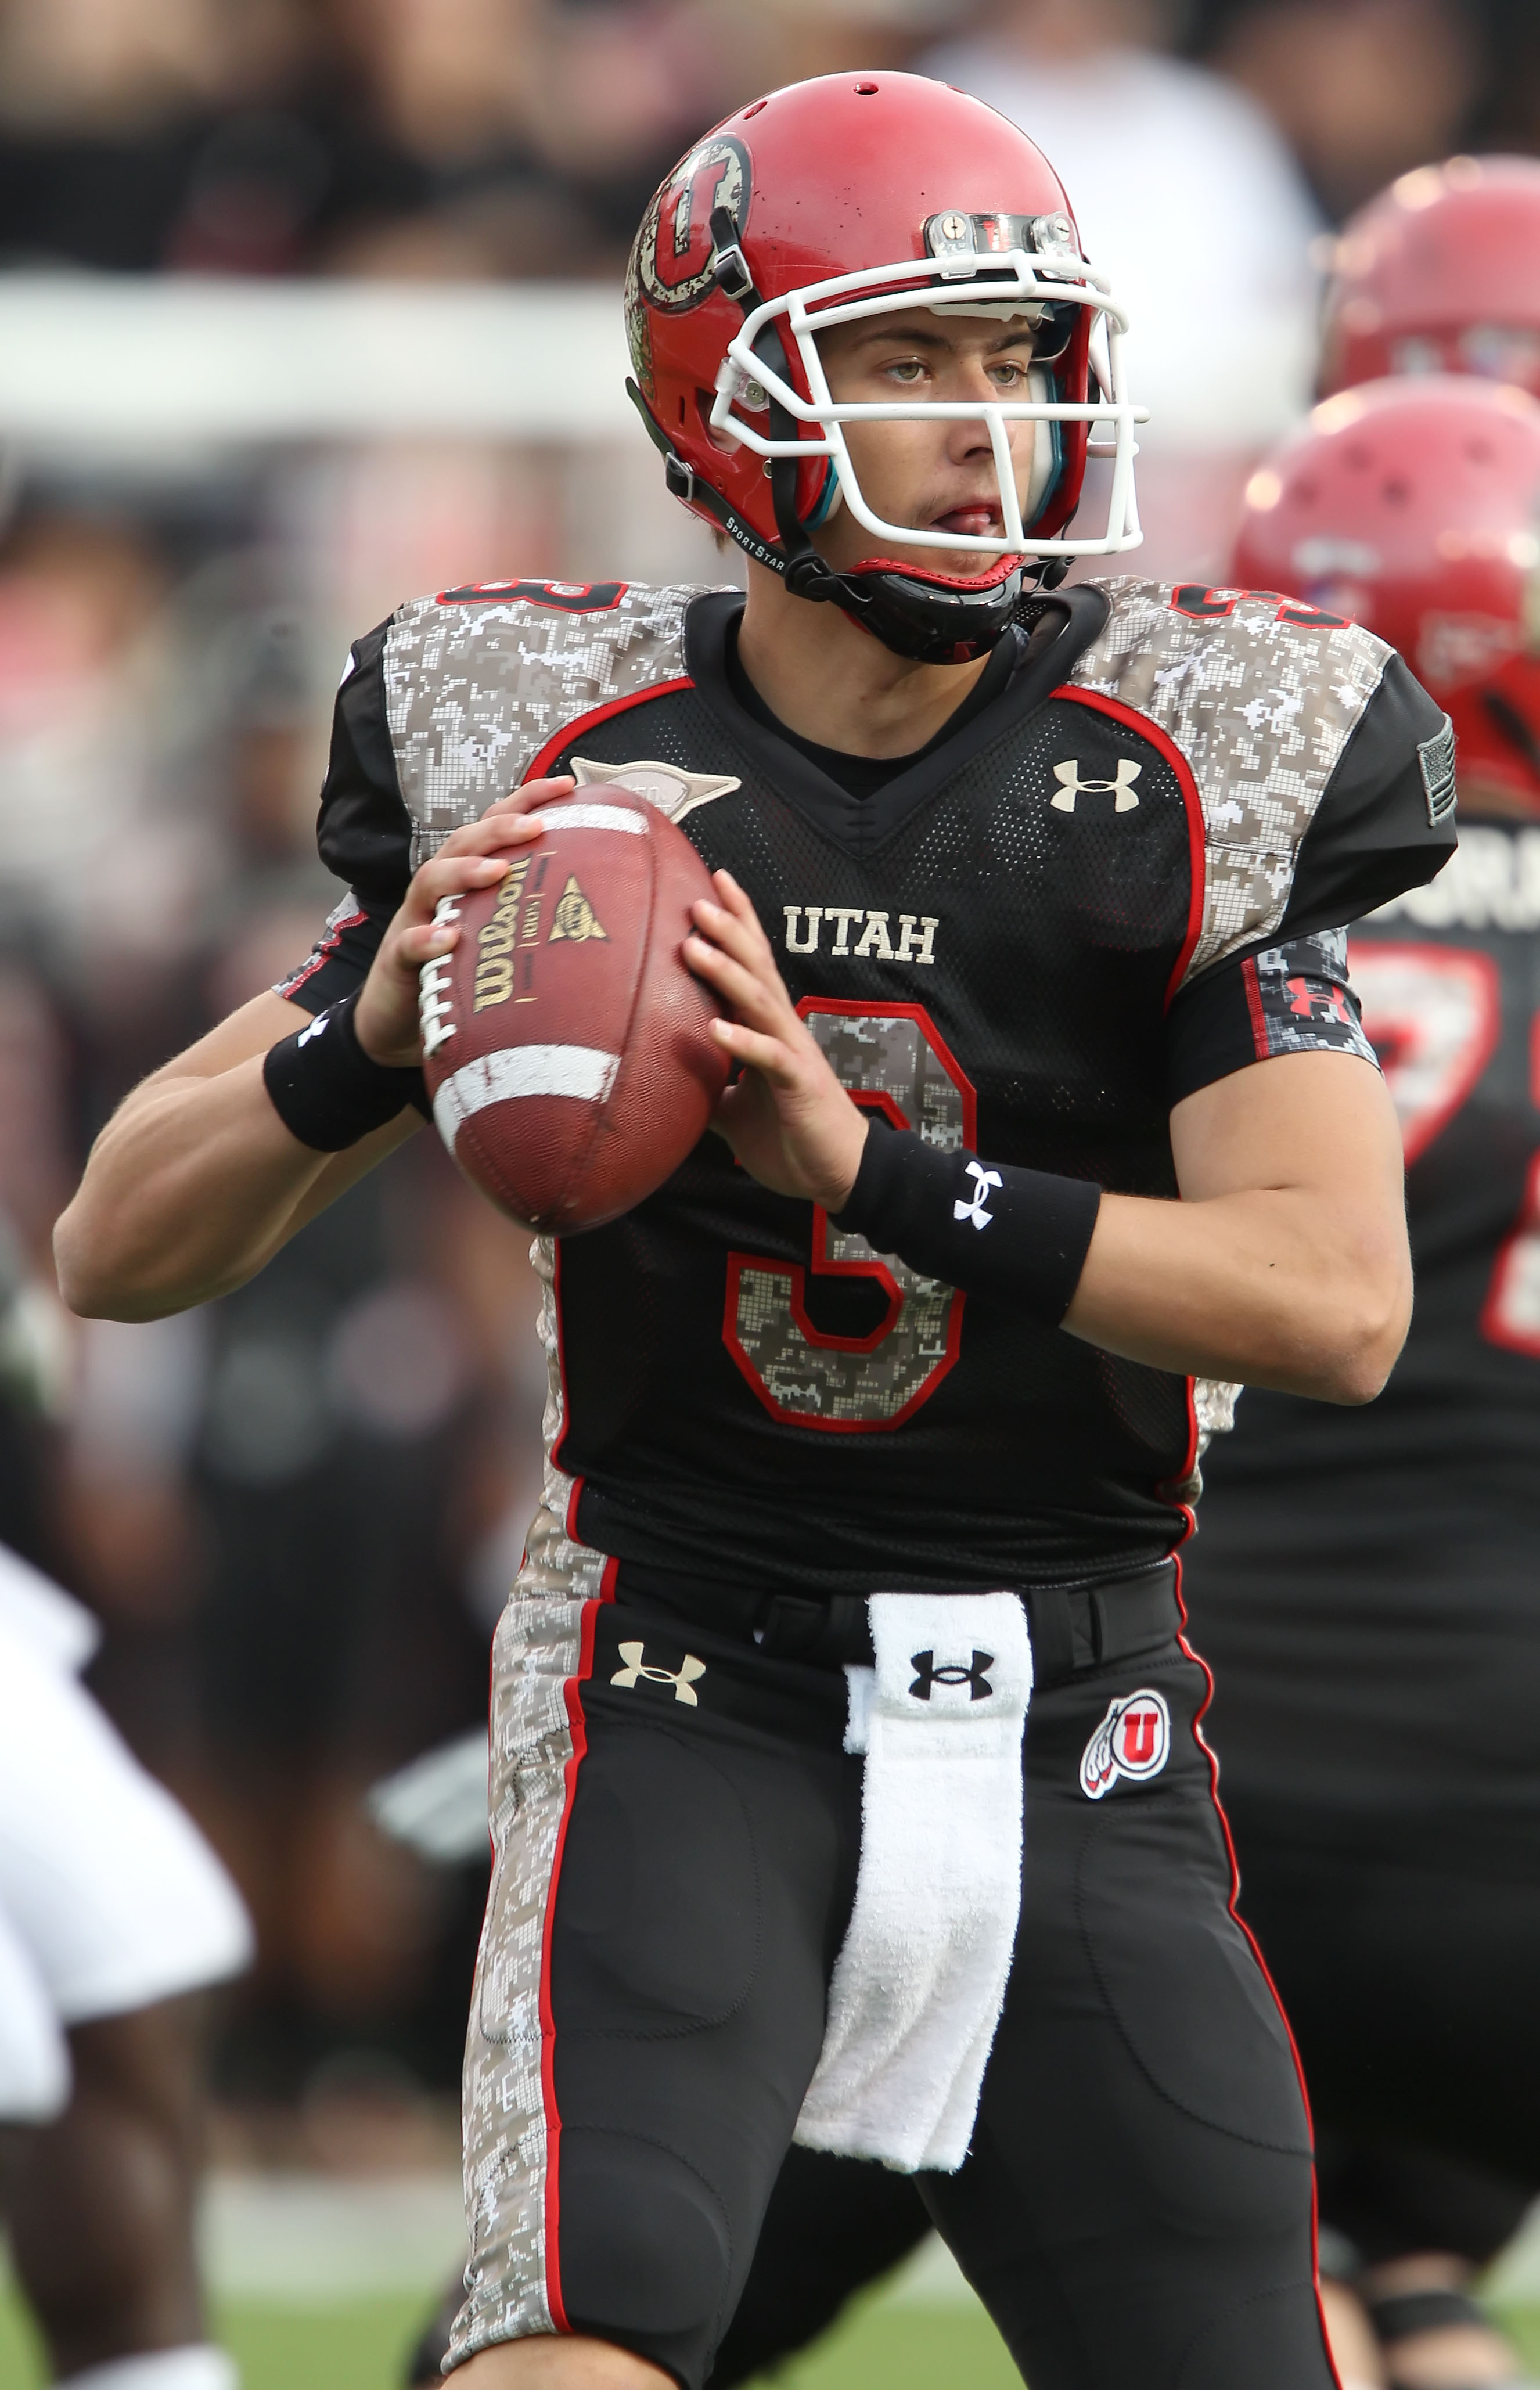 SALT LAKE CITY, UT - NOVEMBER 6: Quarterback Jordan Wynn #3 of the Utah Utes looks to throw a pass in a game against the TCU Horned Frogs during the second half of an NCAA Football game November 6, 2010 at Rice-Eccles Stadium in Salt Lake City, Utah. TCU